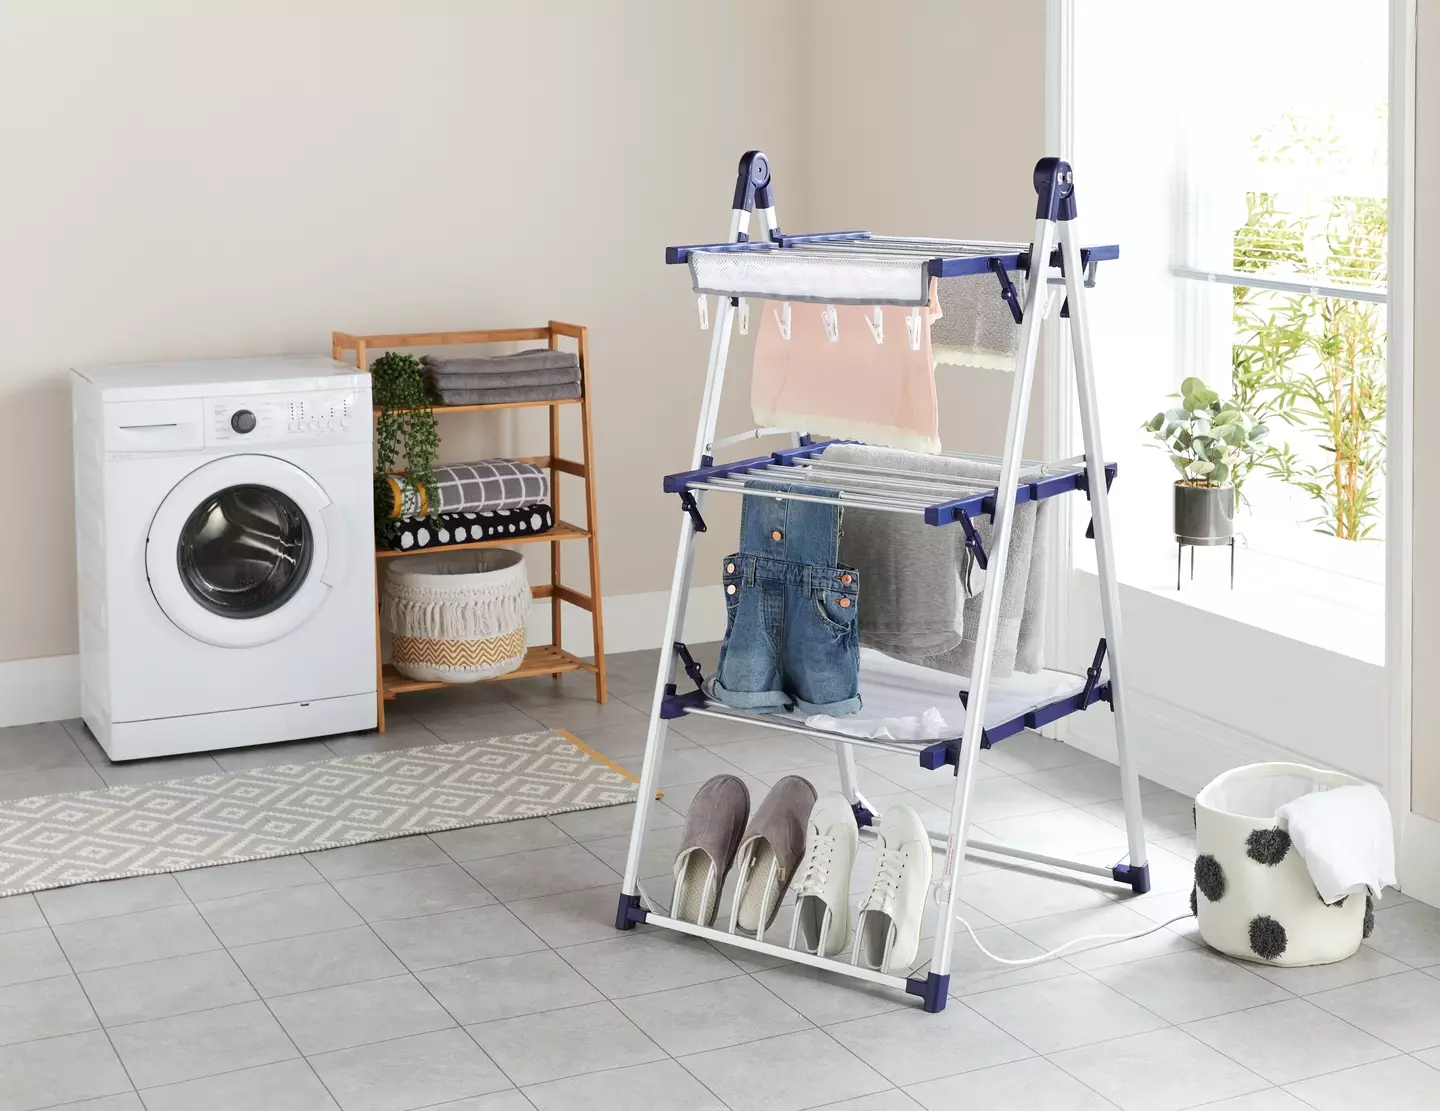 The heated airer is one of Aldi's Specialbuys (